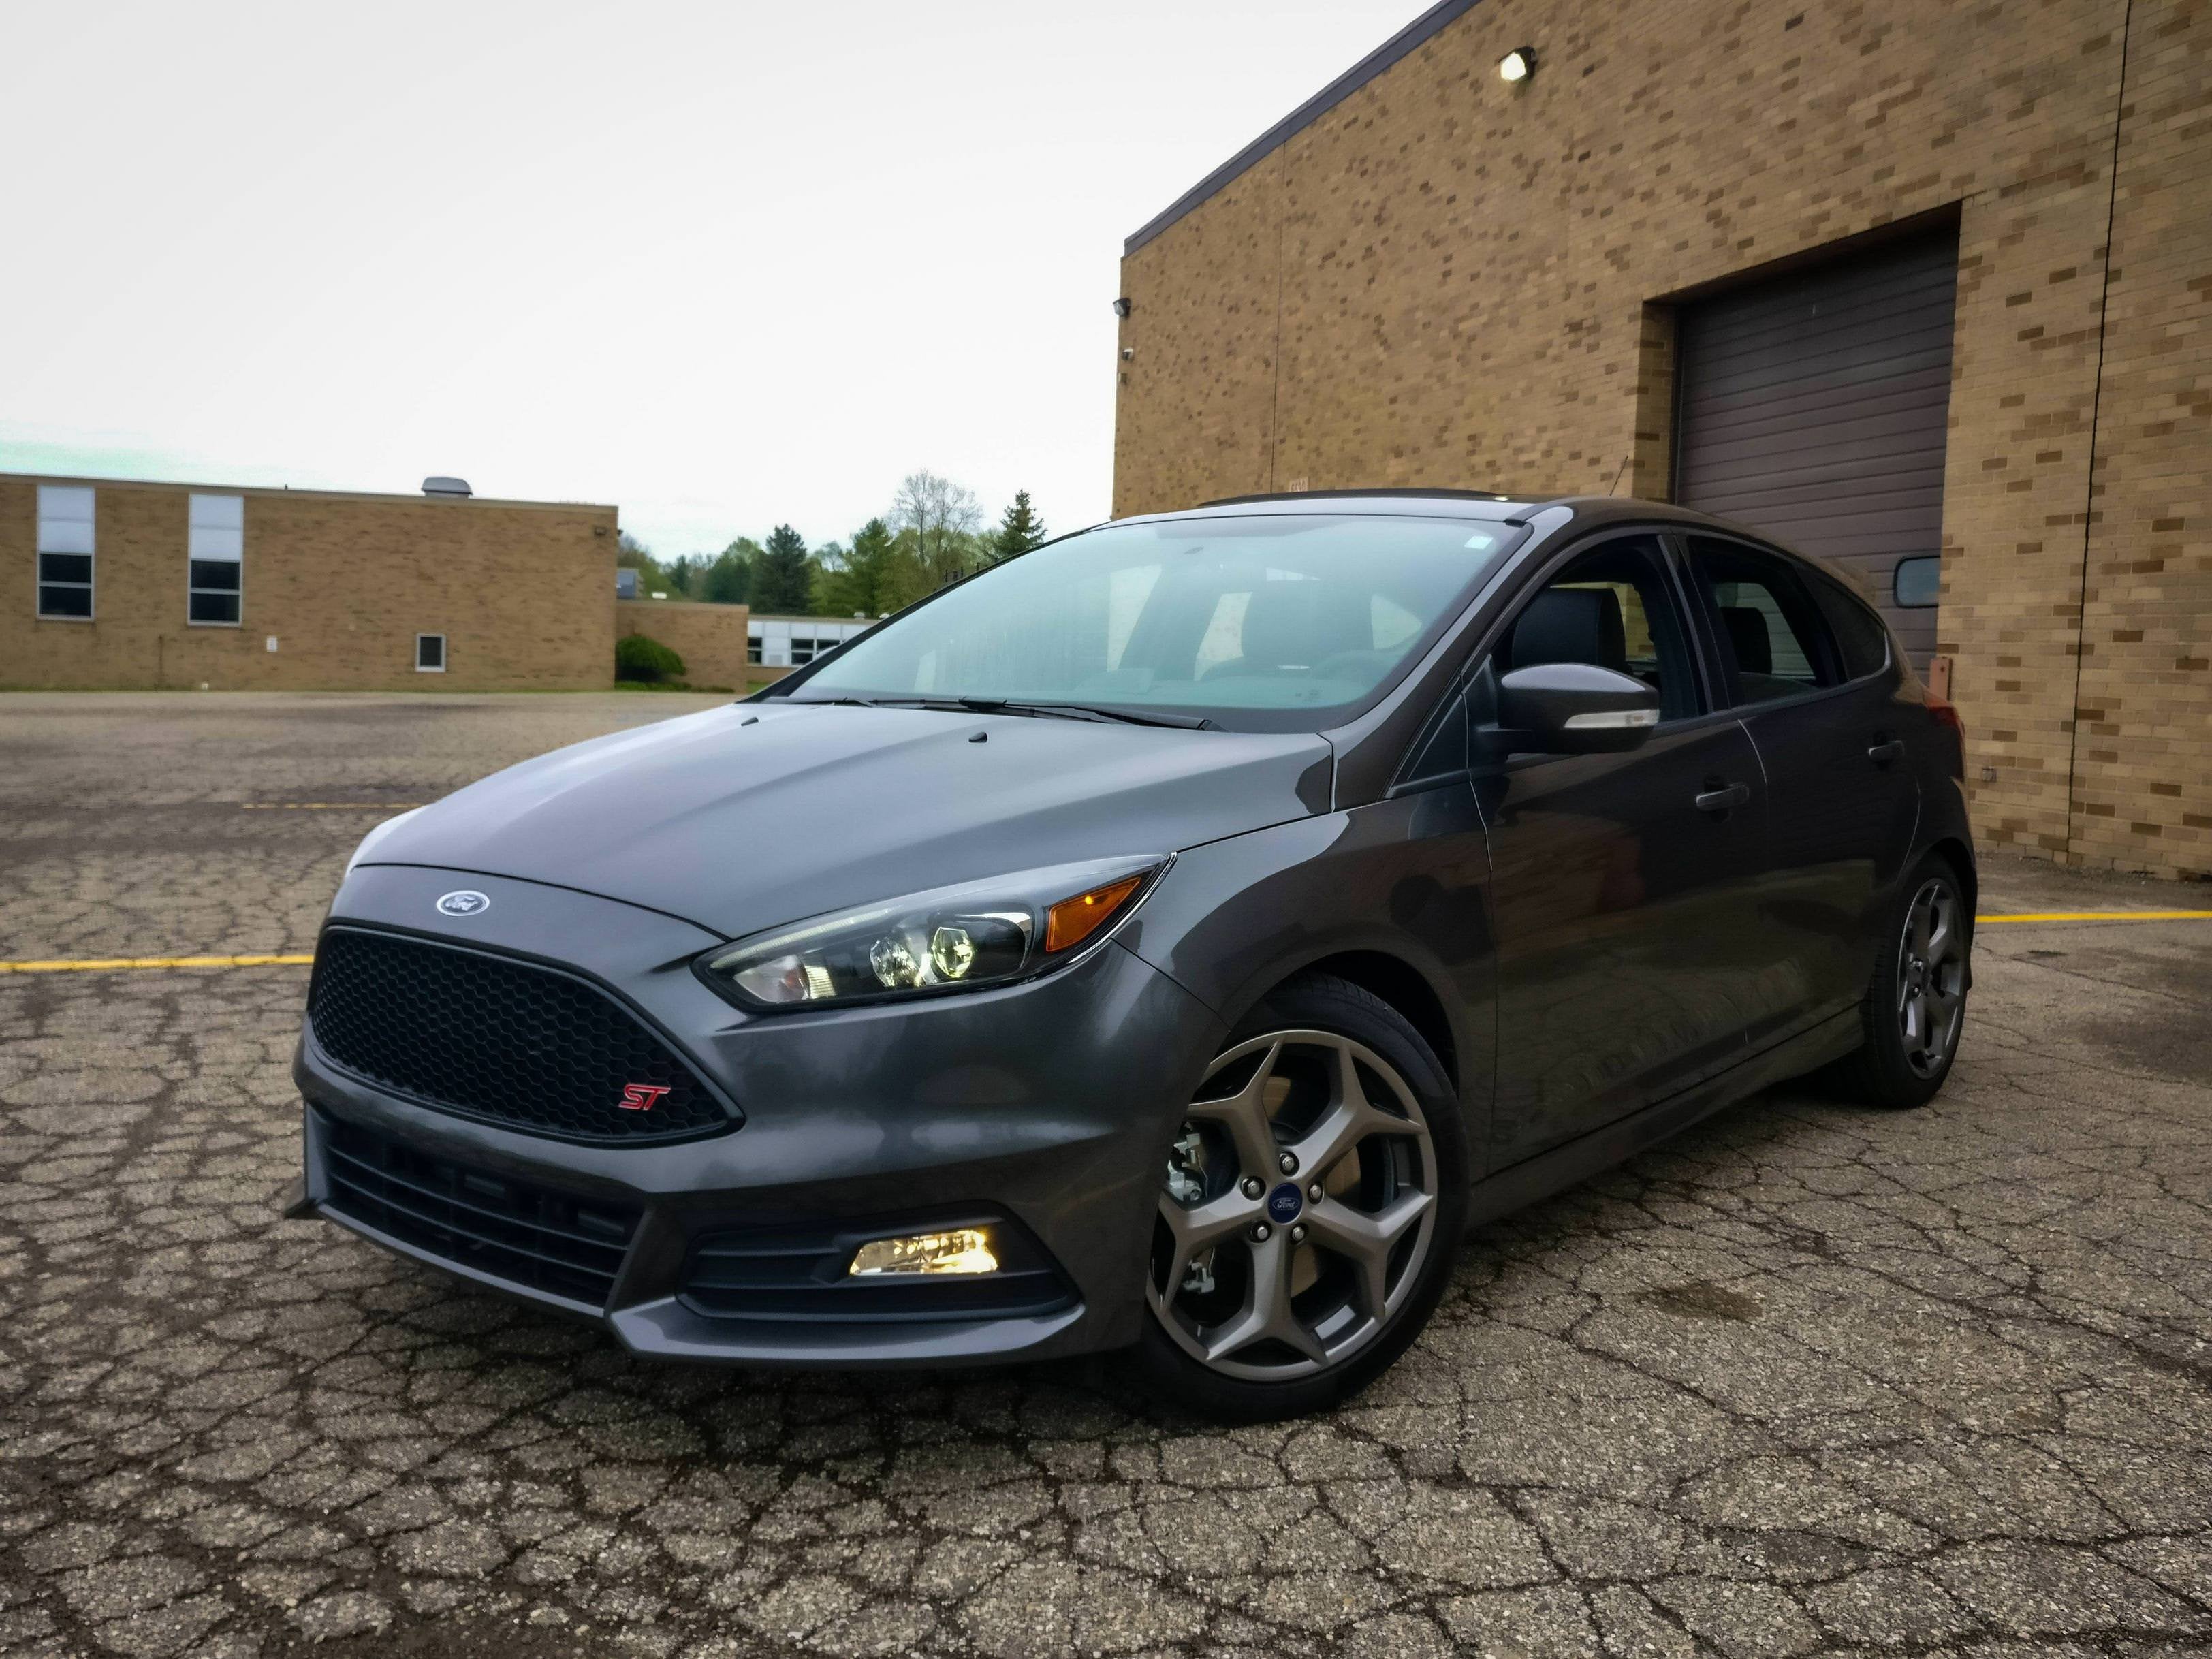 Bought My First New Car - 2018 Ford Focus ST3 : r/FocusST